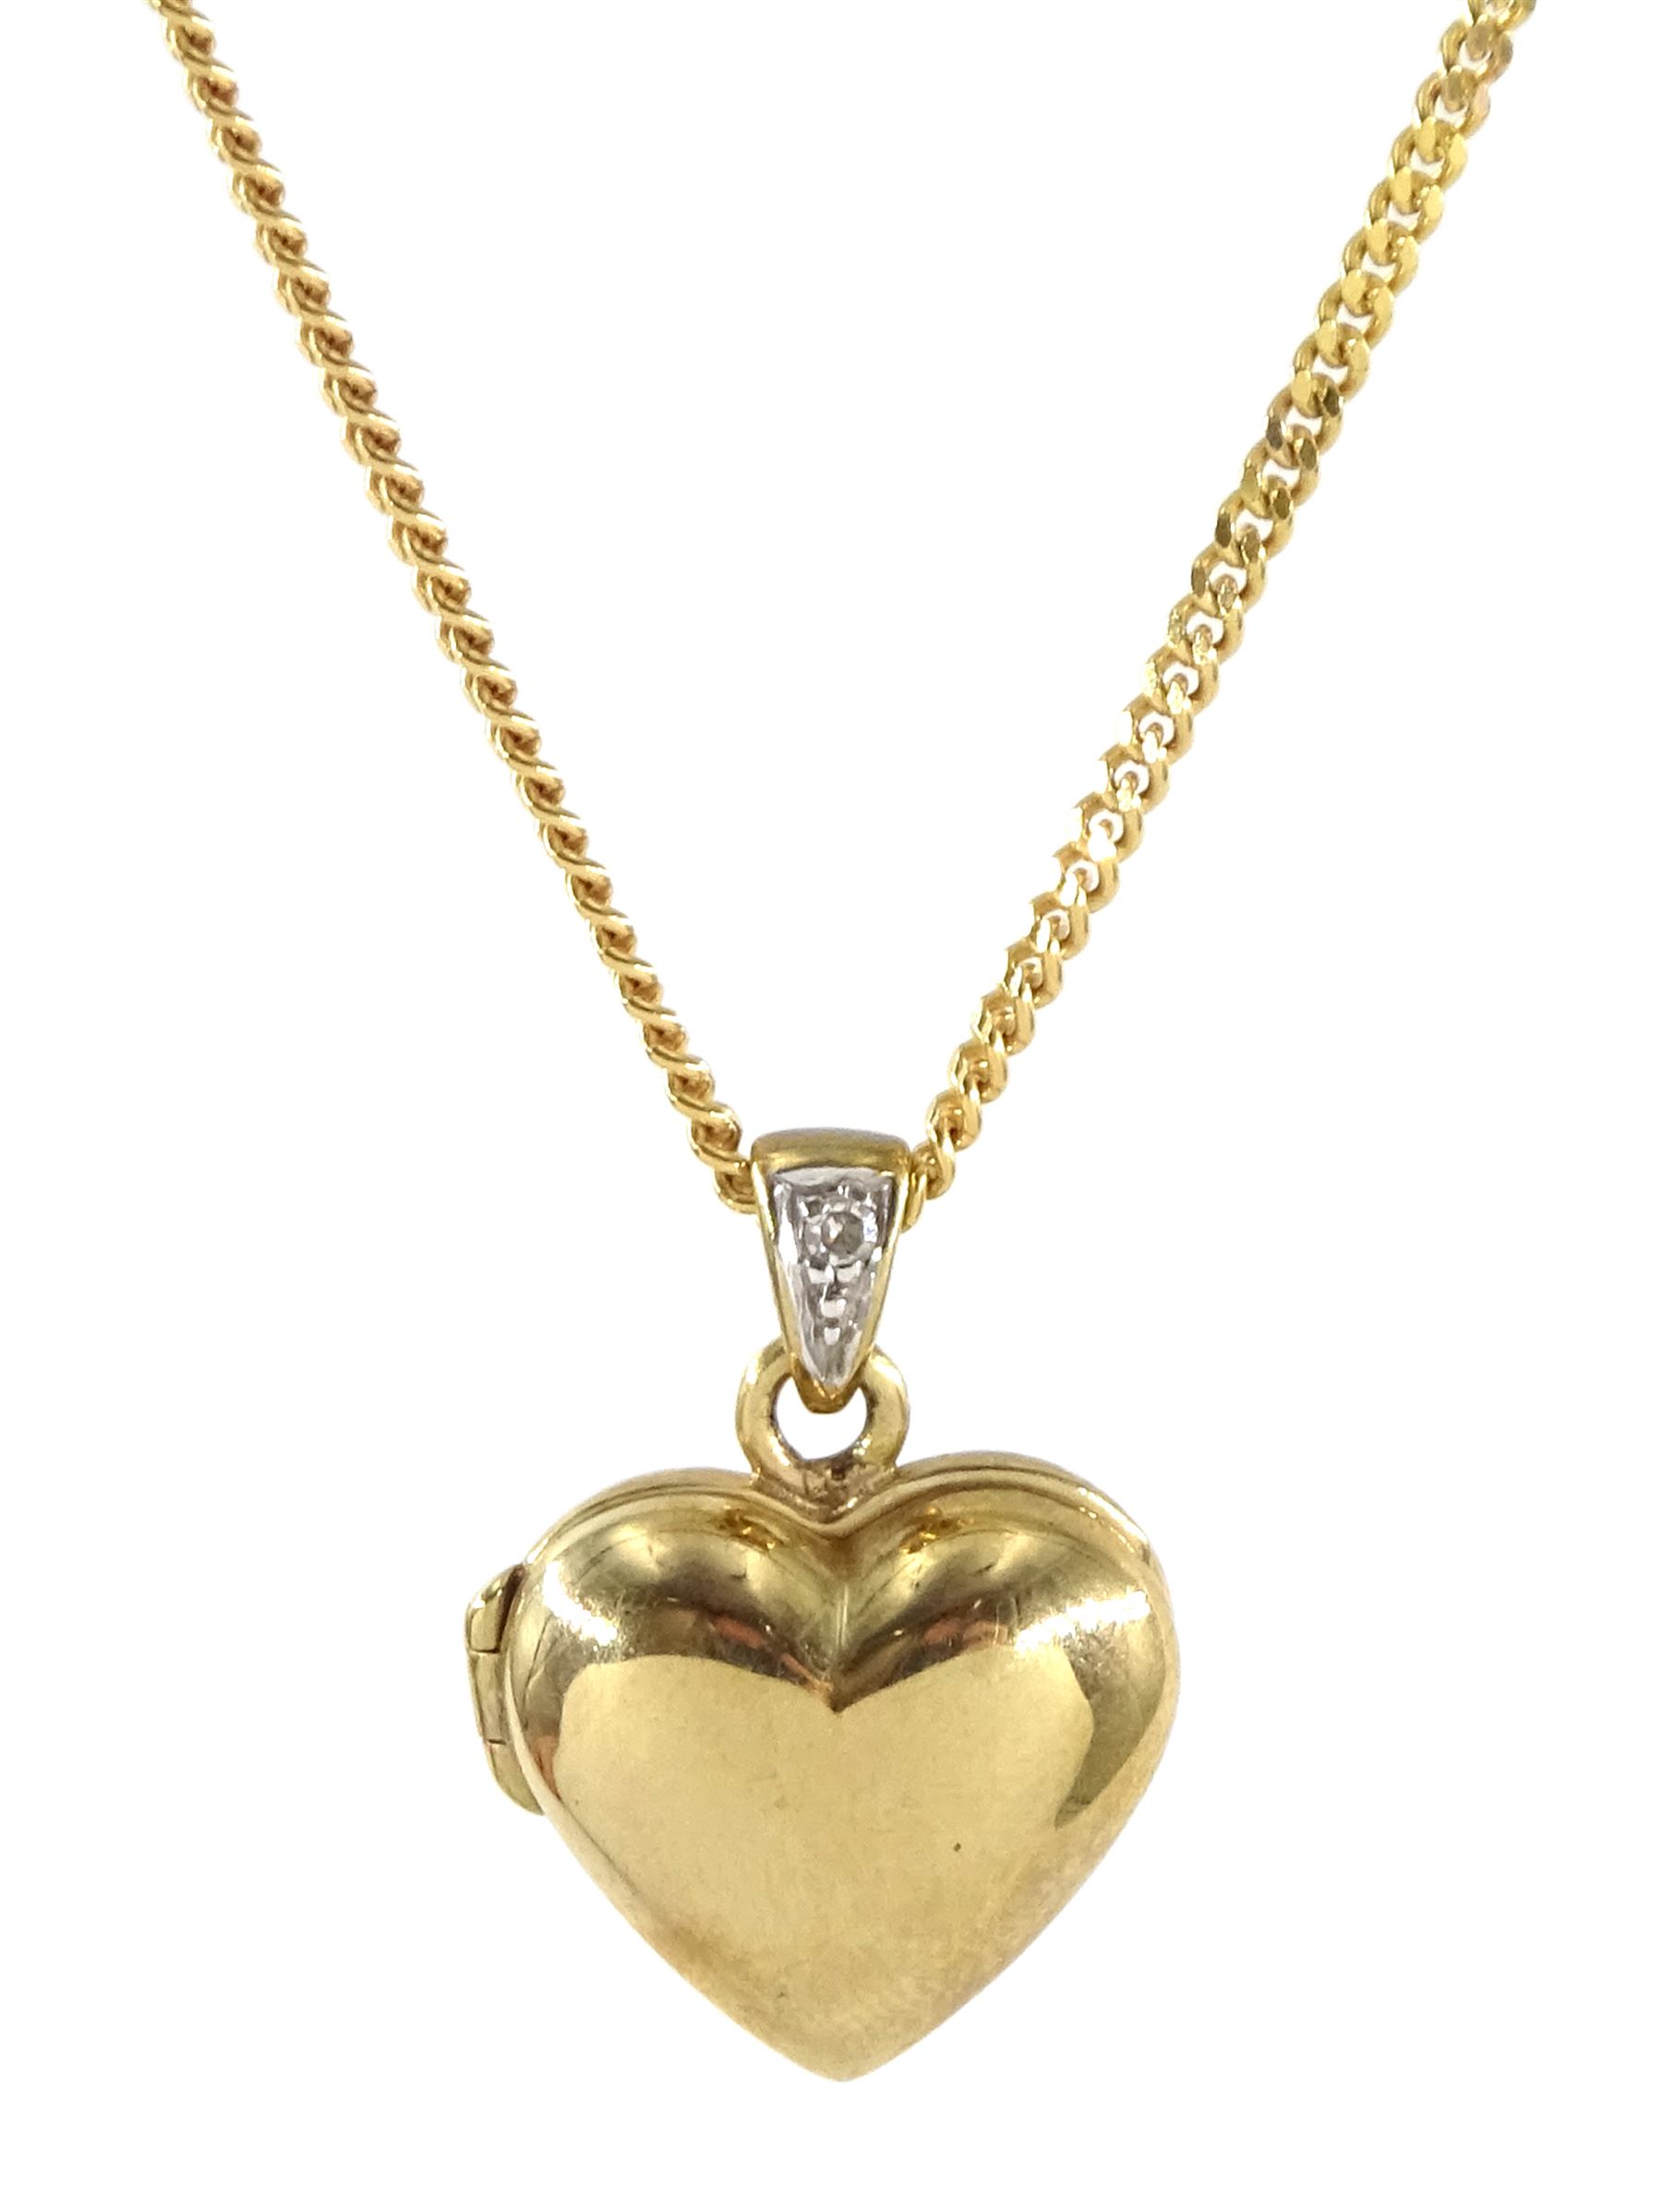 Buy Solid 9ct Yellow Gold Heart Pendant With Sterling Silver Chain, Gold  Heart Necklace, Heart Necklace, Necklace for Daughters, Gift for Her Online  in India - Etsy